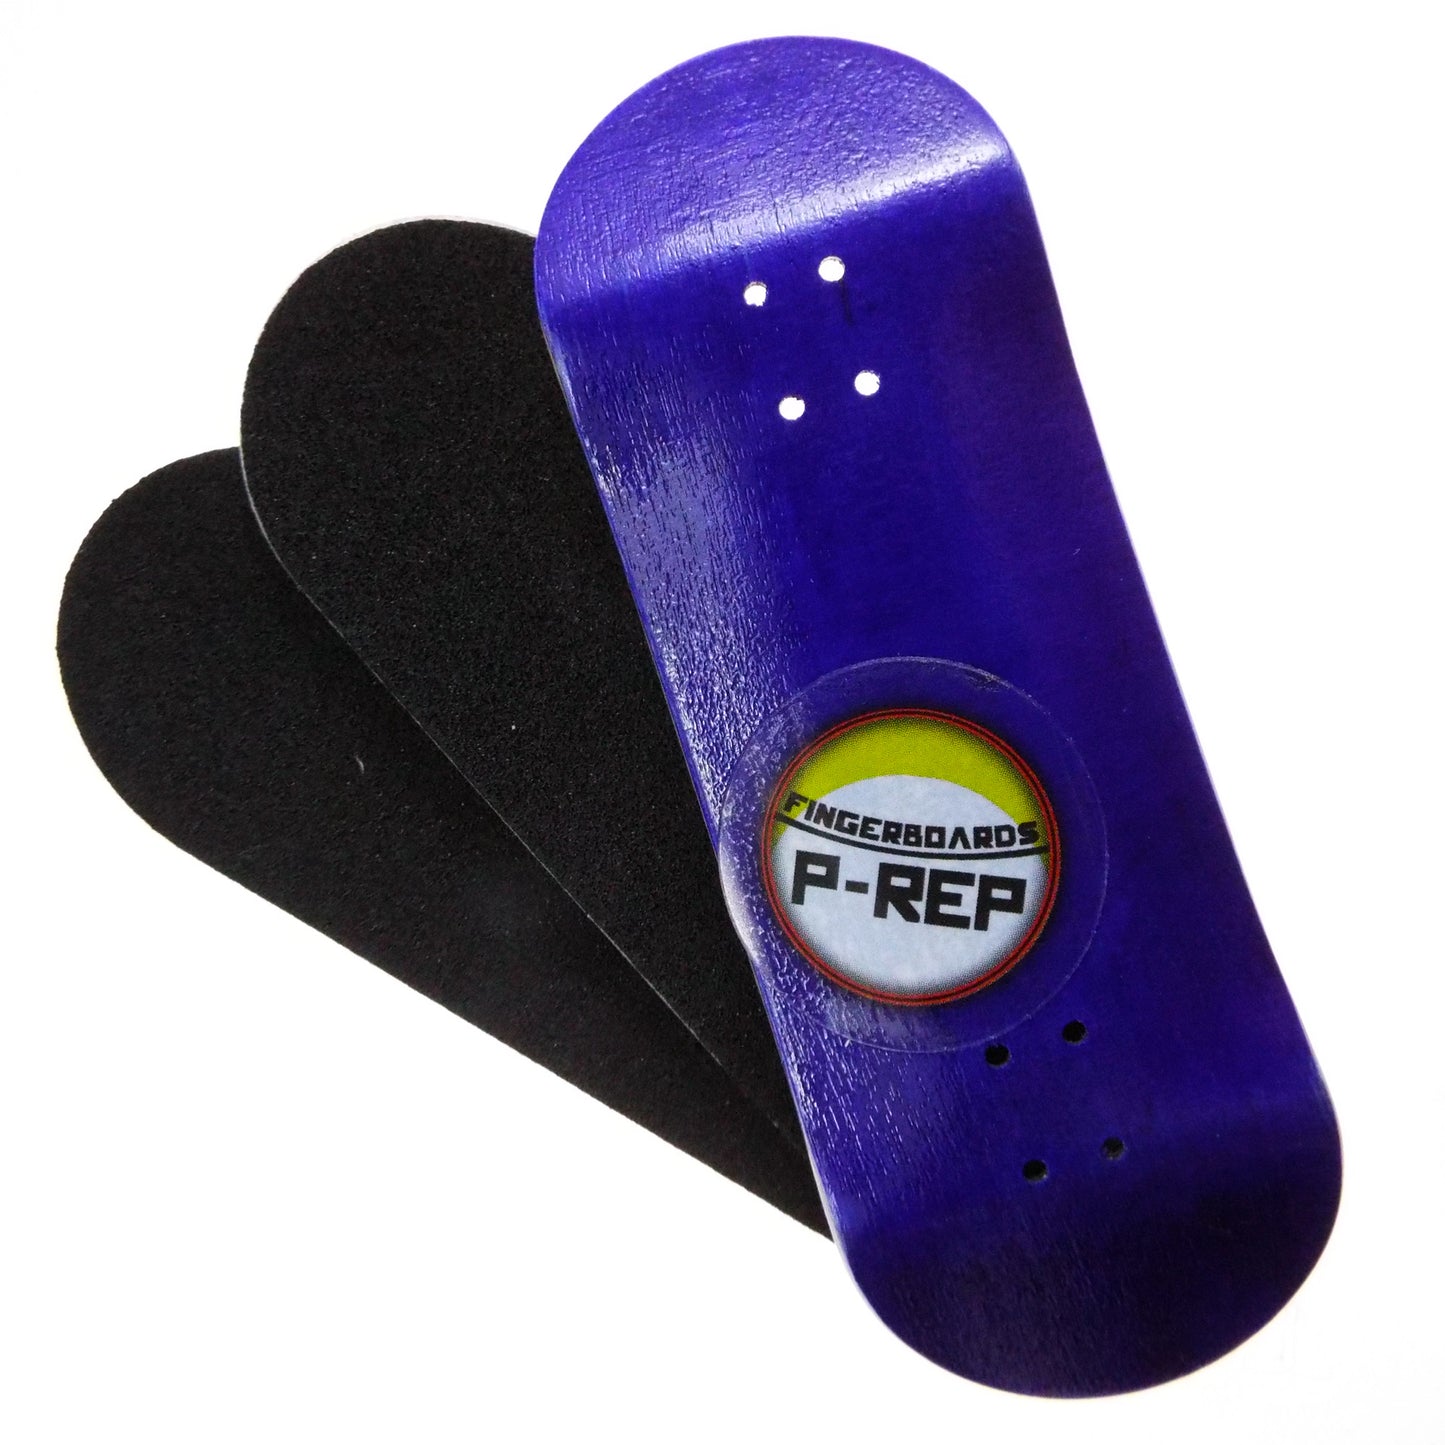 P-REP  32mm x 97mm V2 Performance Complete - Purple